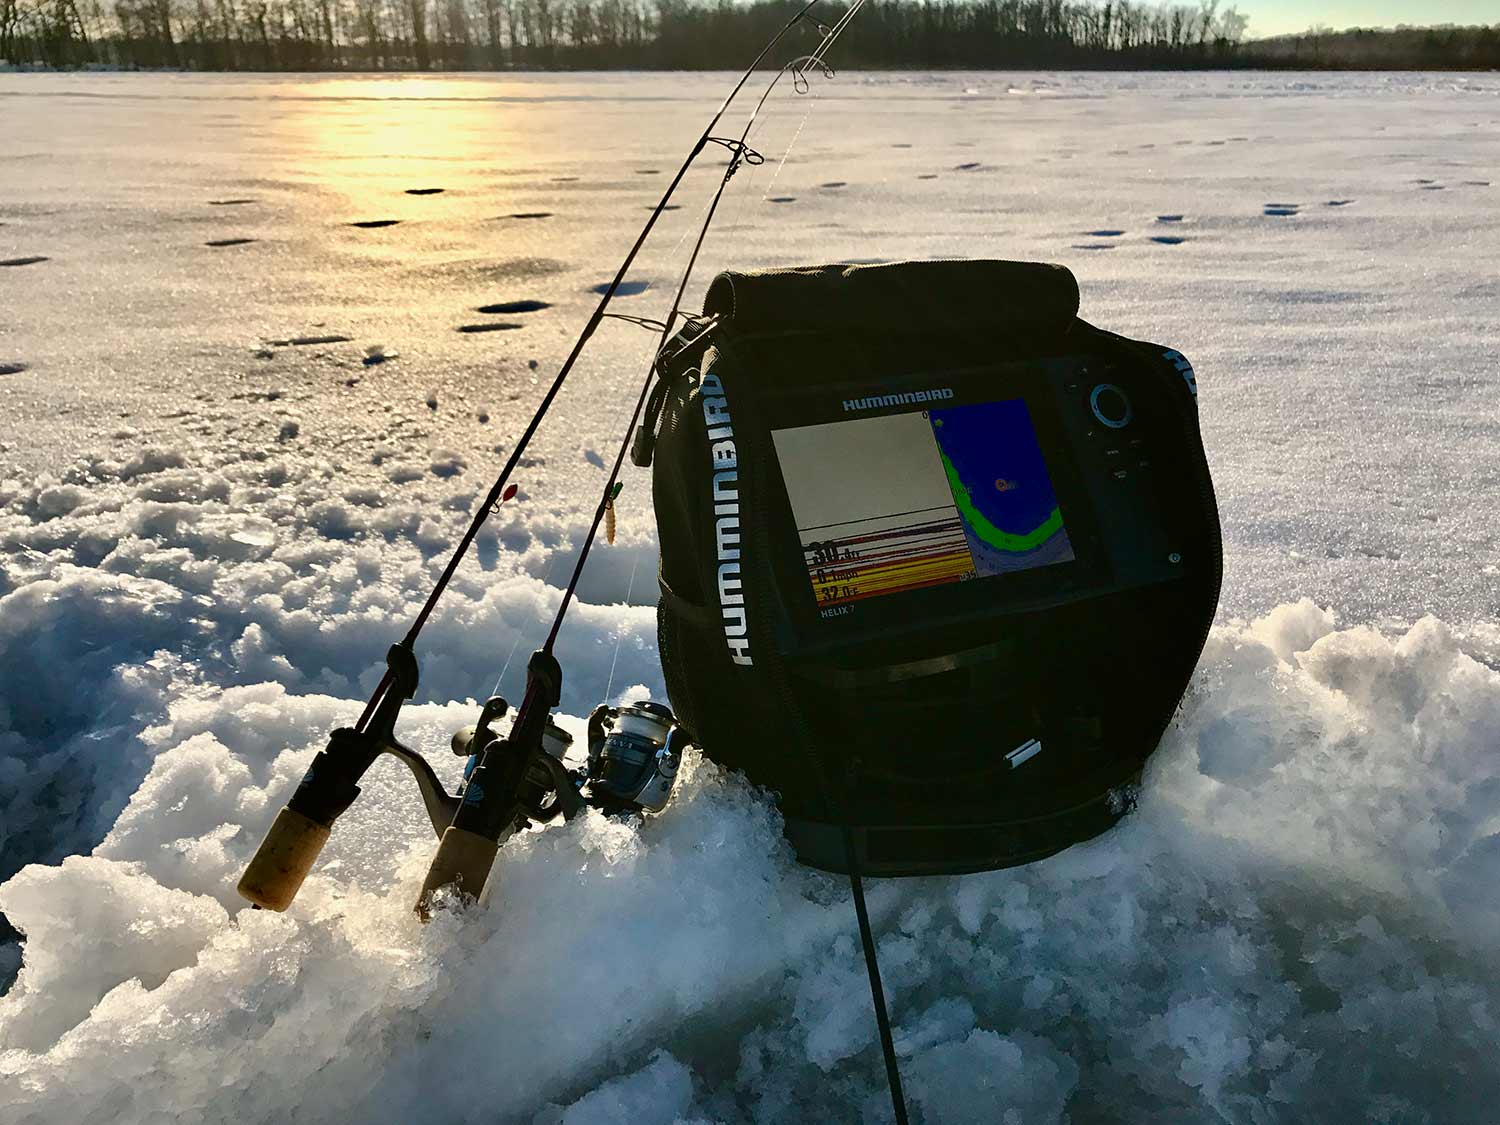 ice fishing gear in the snow.